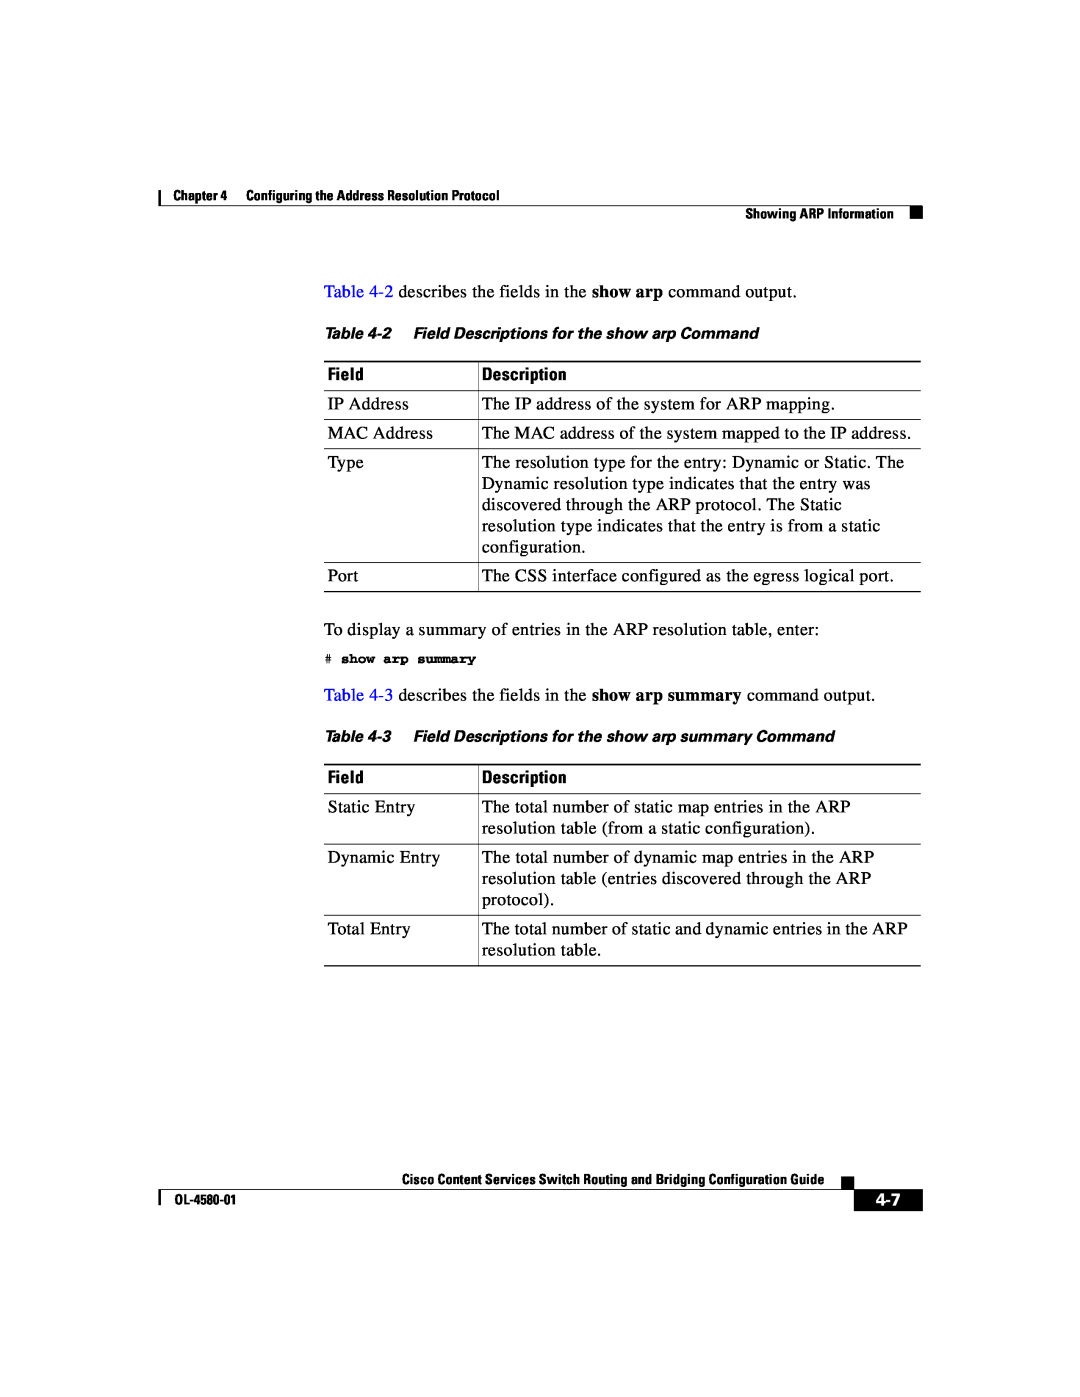 Cisco Systems OL-4580-01 manual 2 Field Descriptions for the show arp Command, # show arp summary 